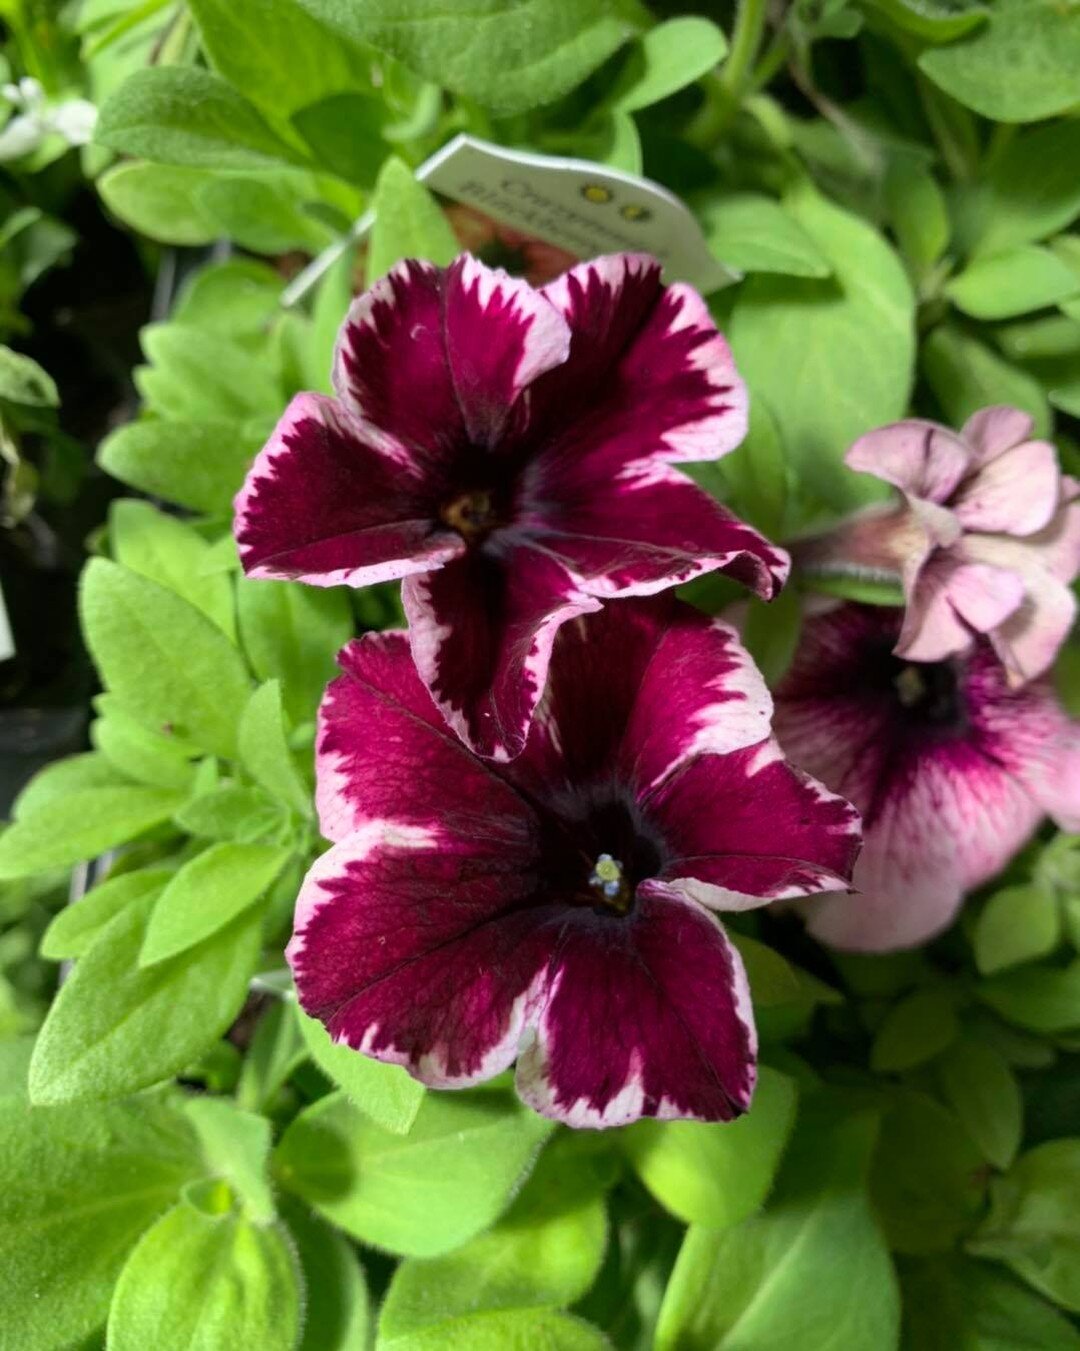 Plants 🪴 are coming in for spring! Check out this new Crazytunia. It&rsquo;s called Cosmic Pink.  Very different looking. Will be awesome in hanging baskets or containers. #lovecrazytunias,